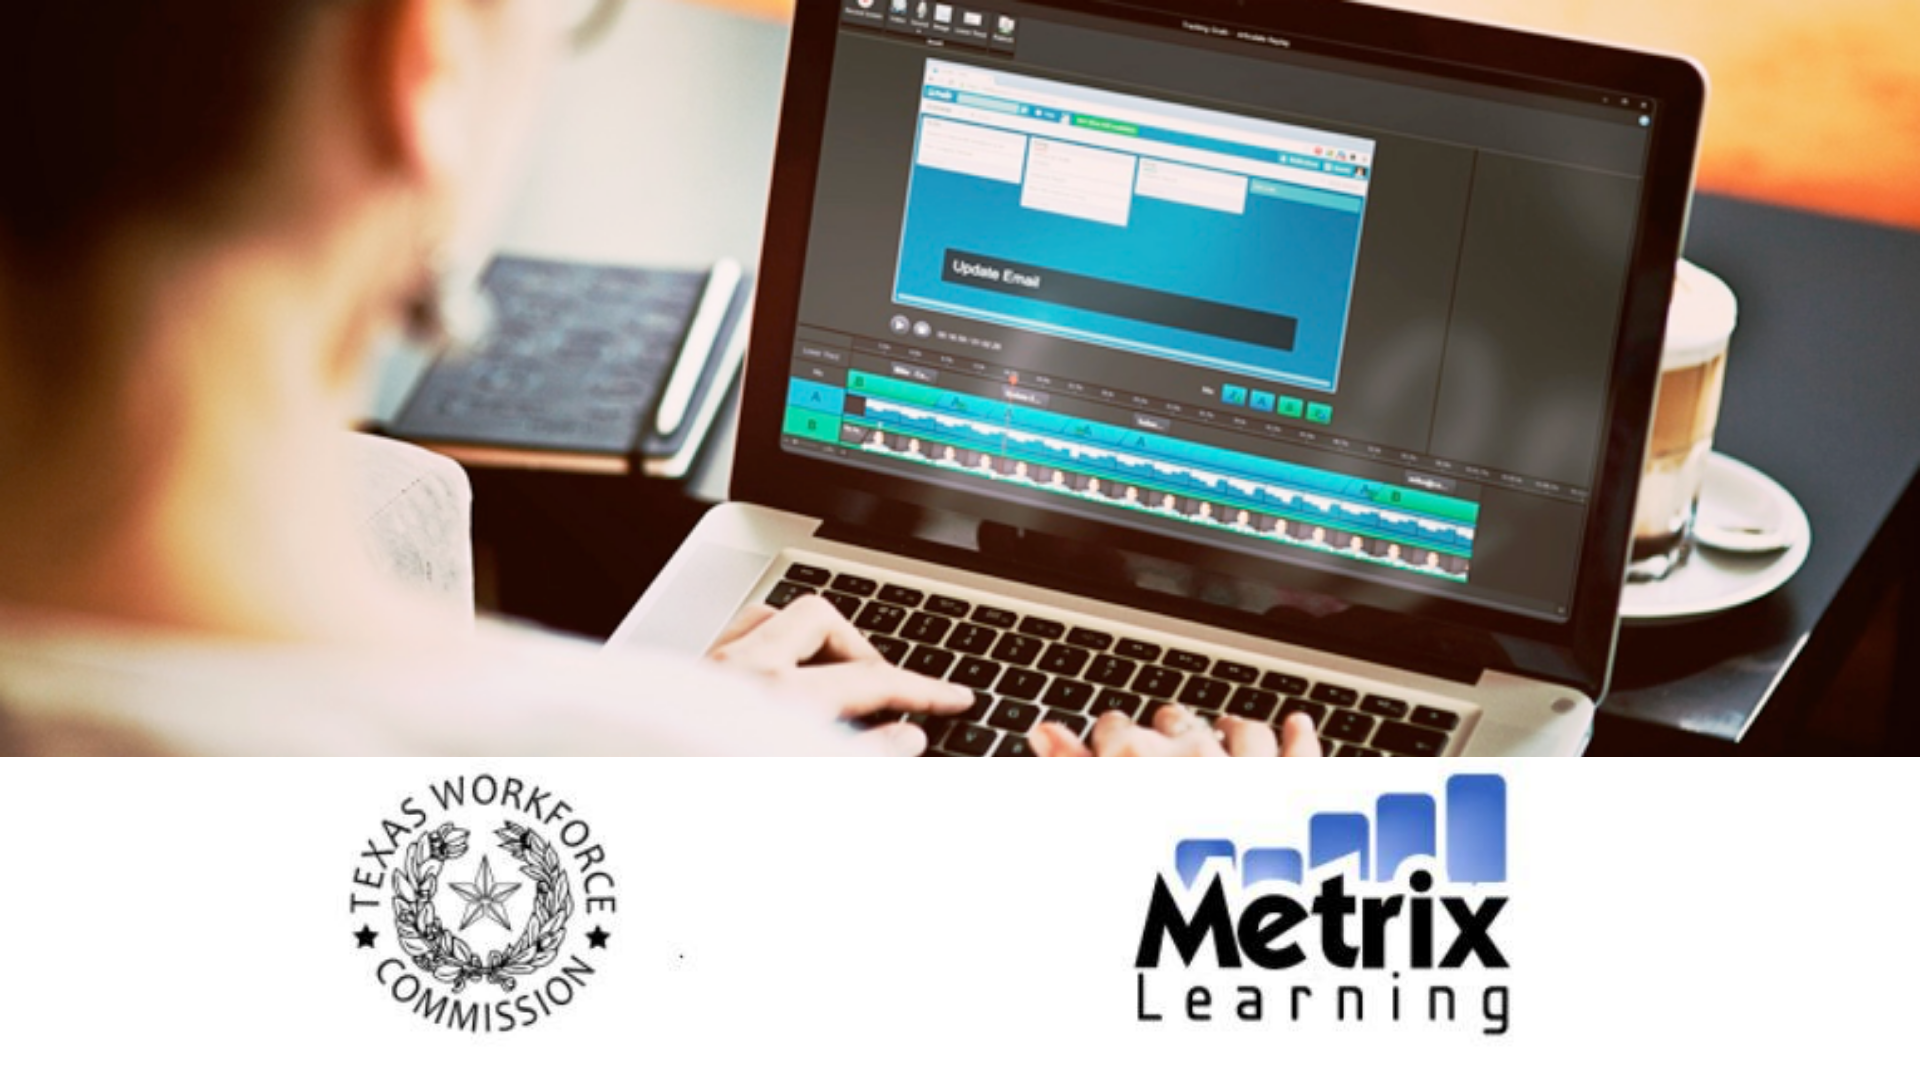 Have you Heard about Metrix Learning?